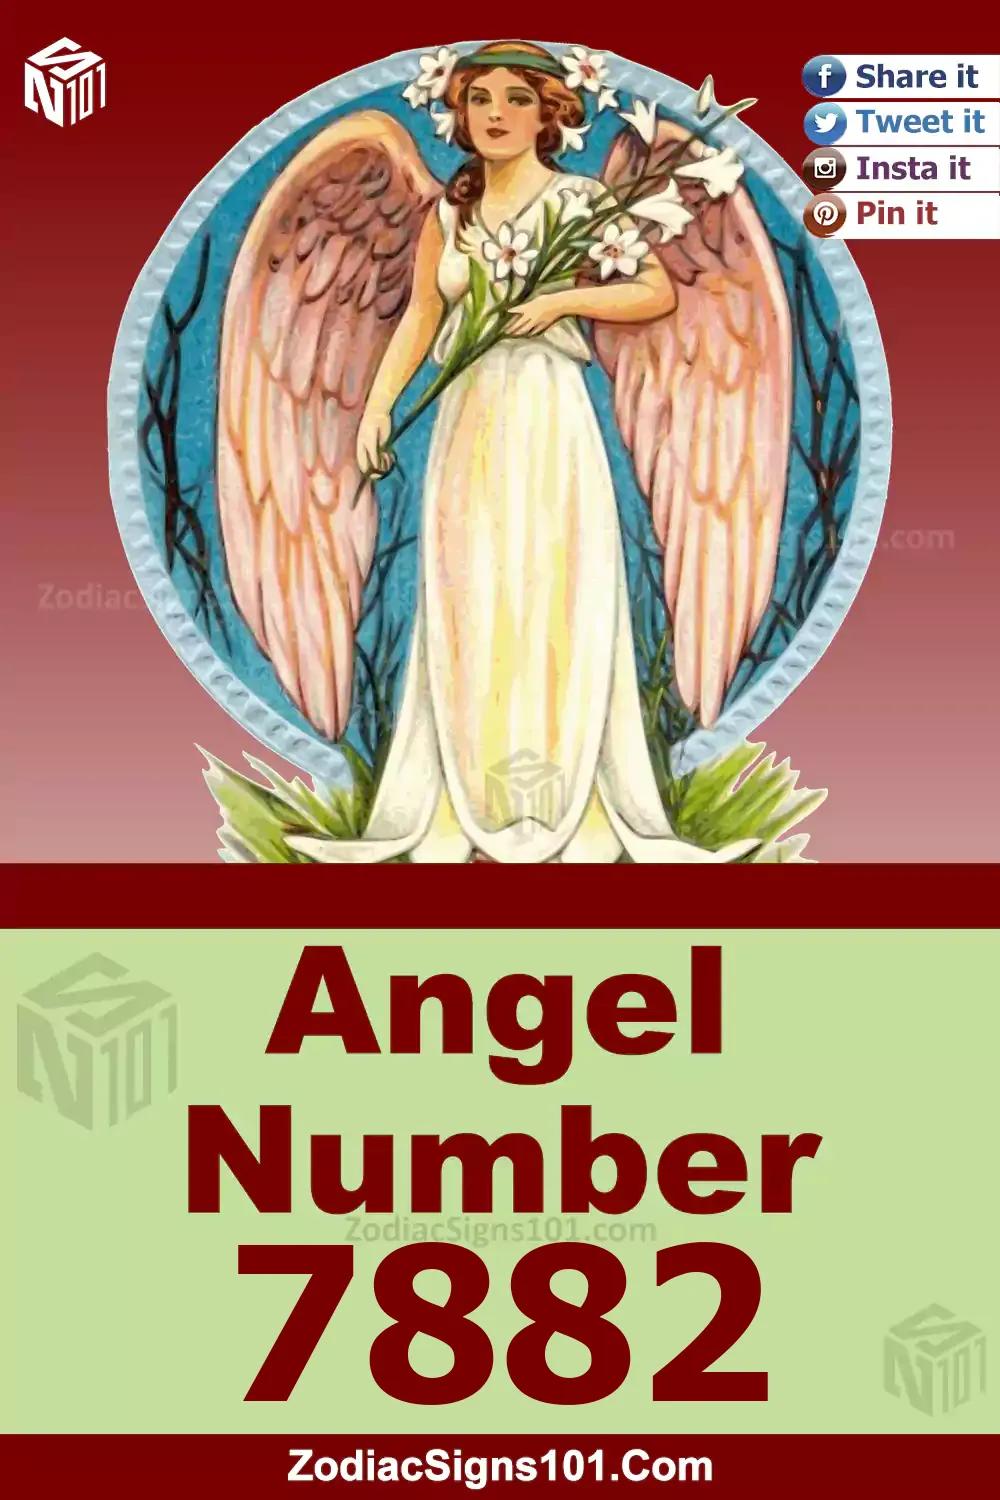 7882 Angel Number Meaning